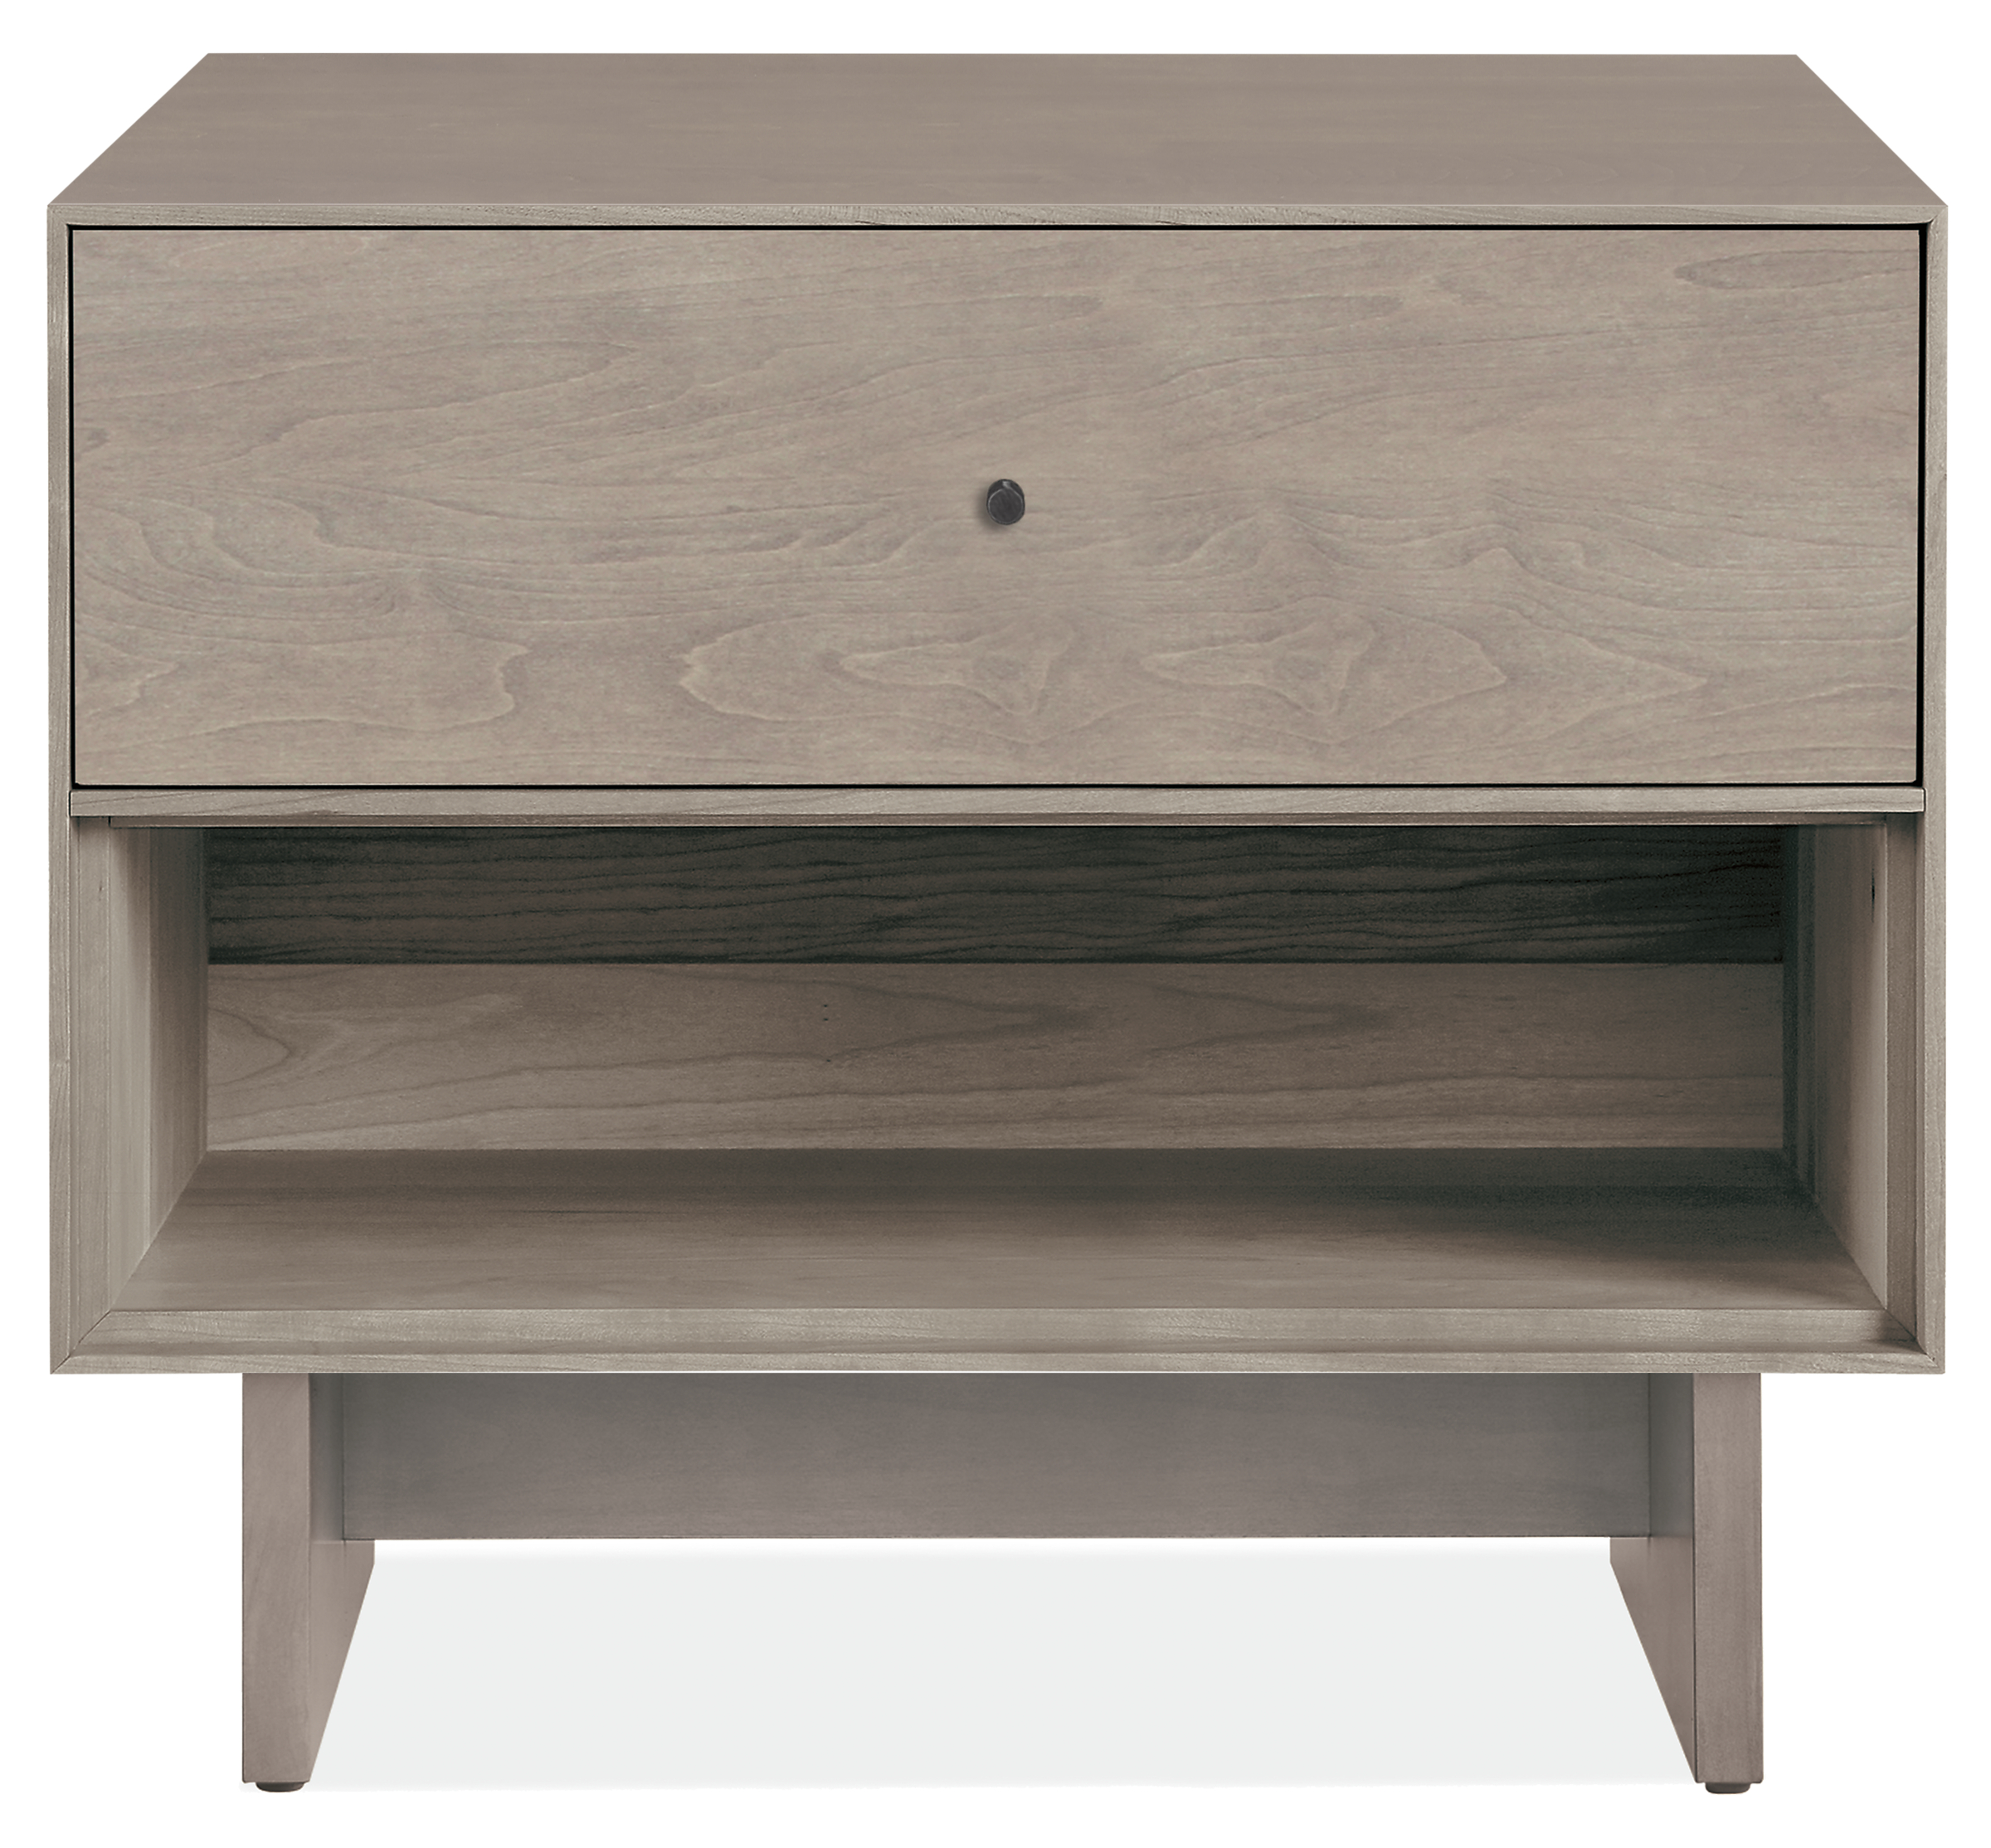 Hudson 26w 20d 22h One-Drawer Nightstand with Wood Base